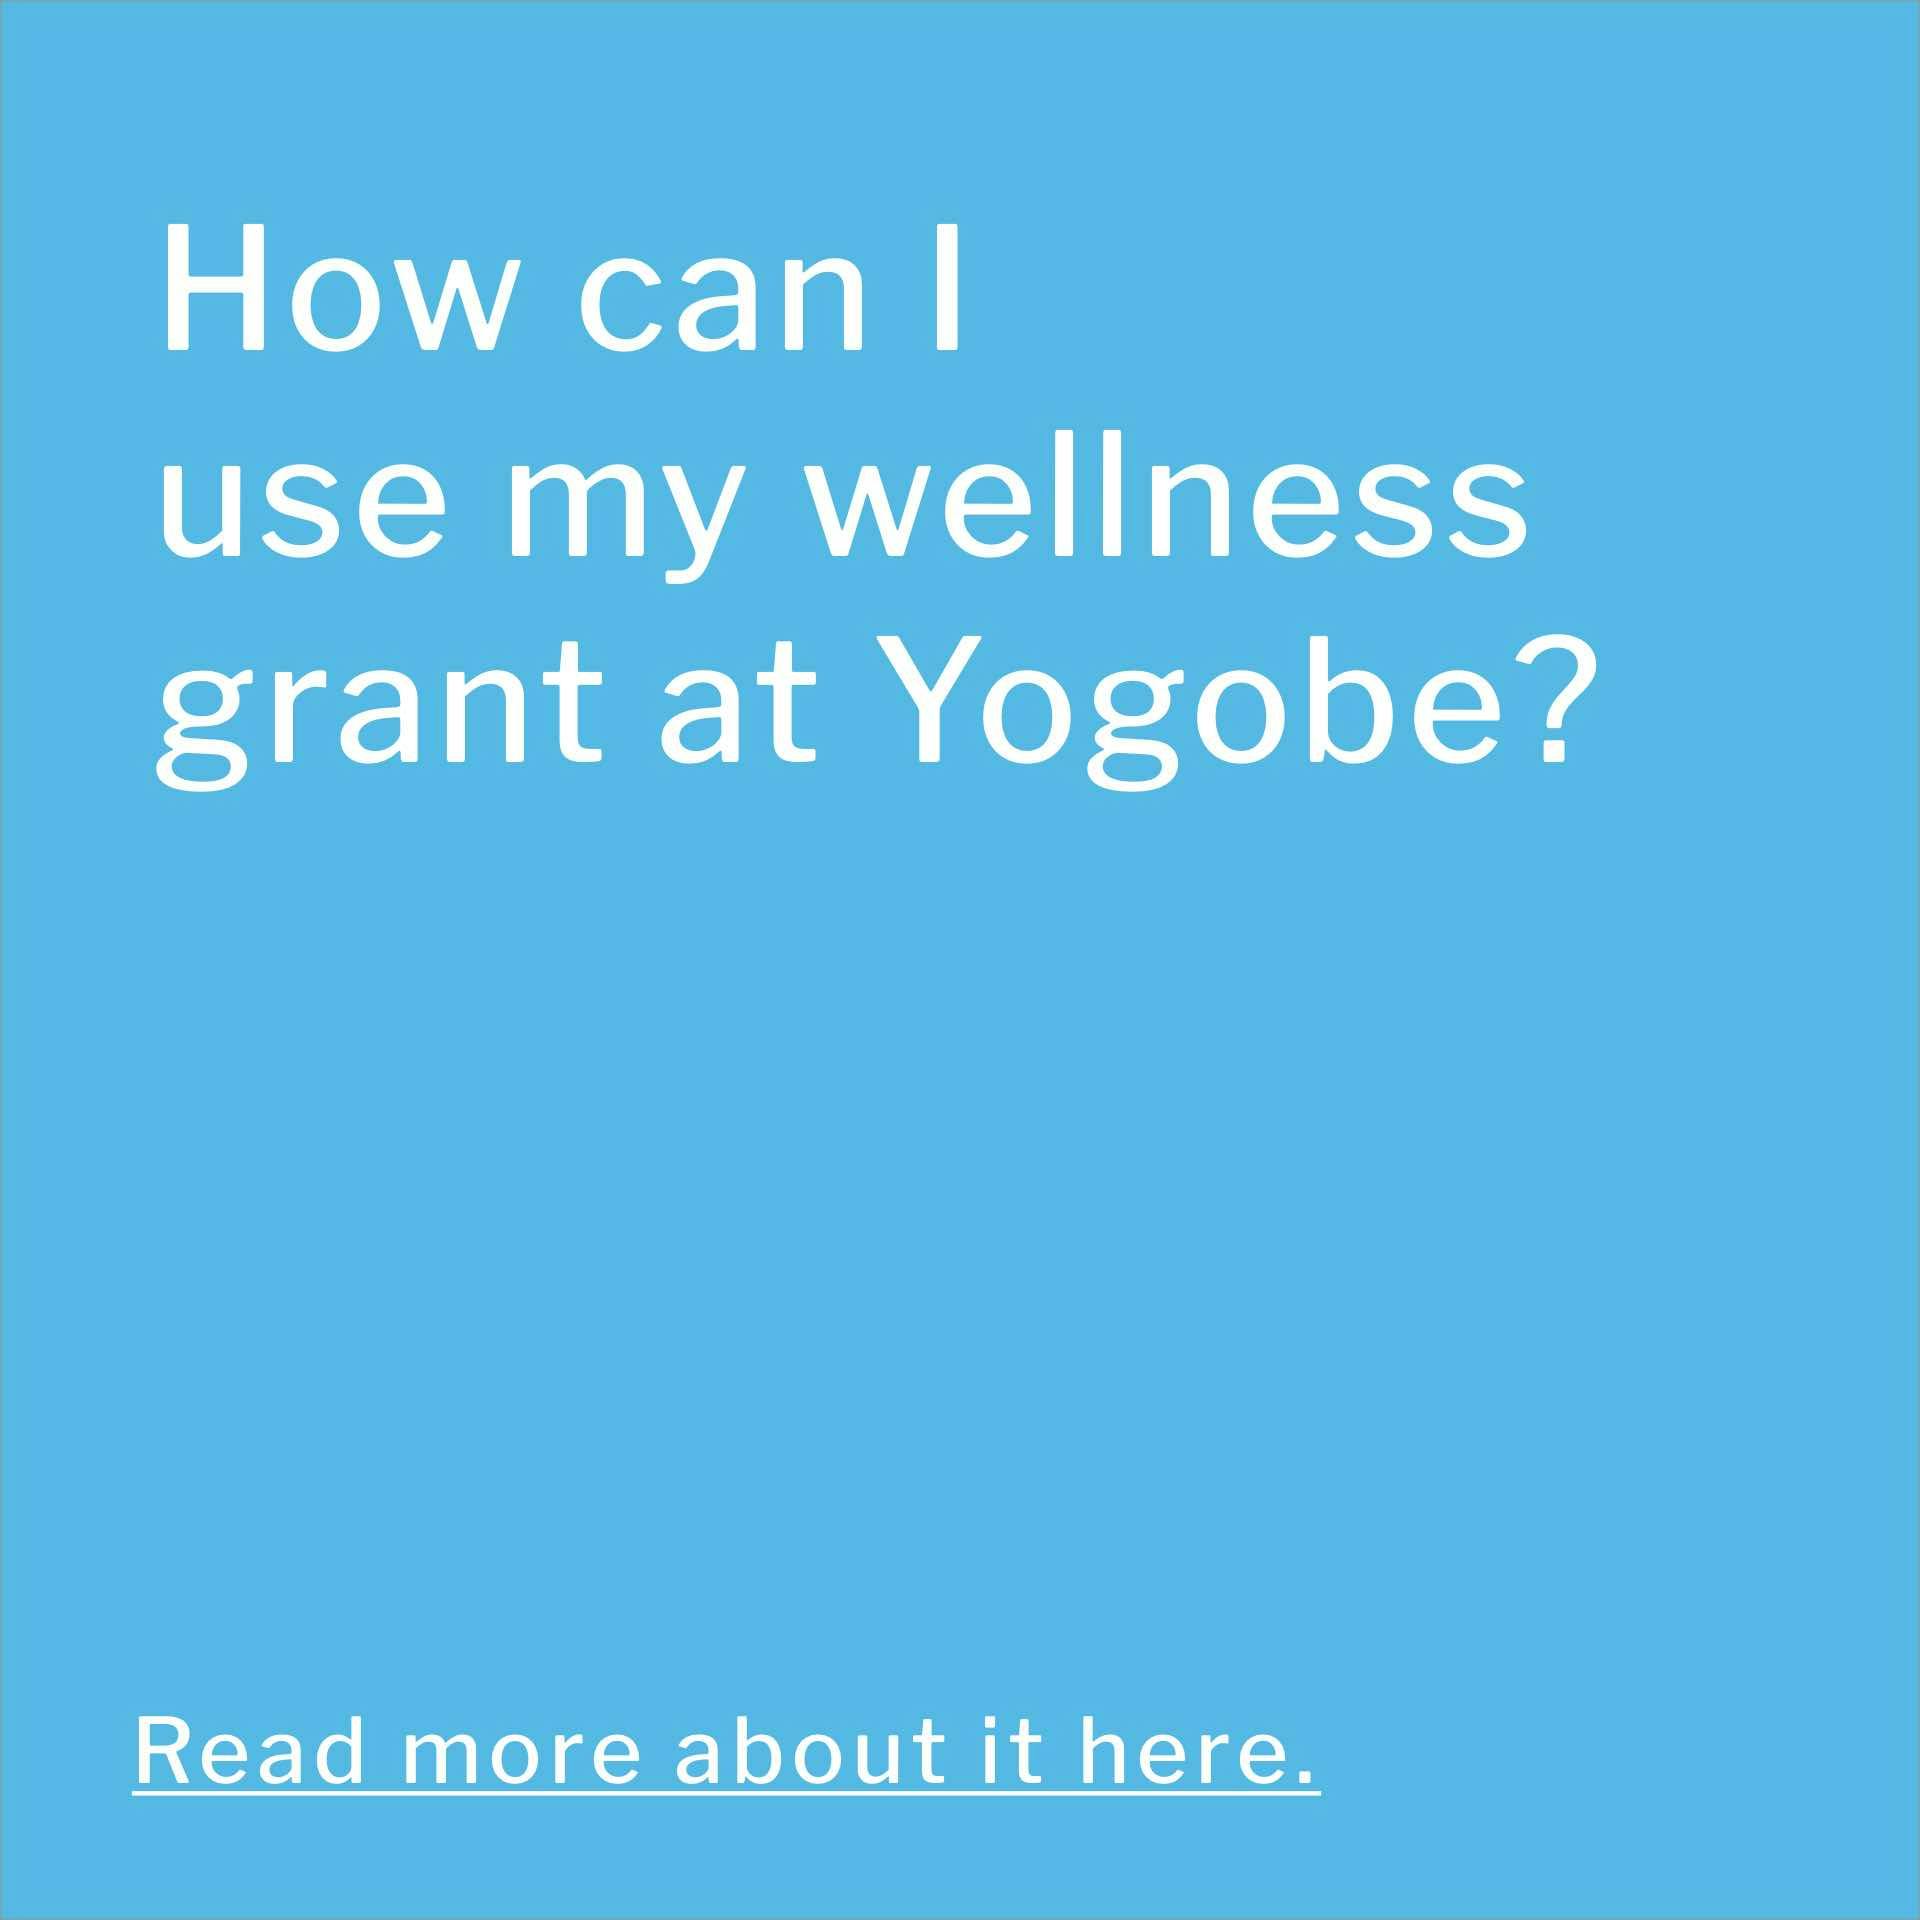 Read more about how you can use your wellness grant at Yogobe